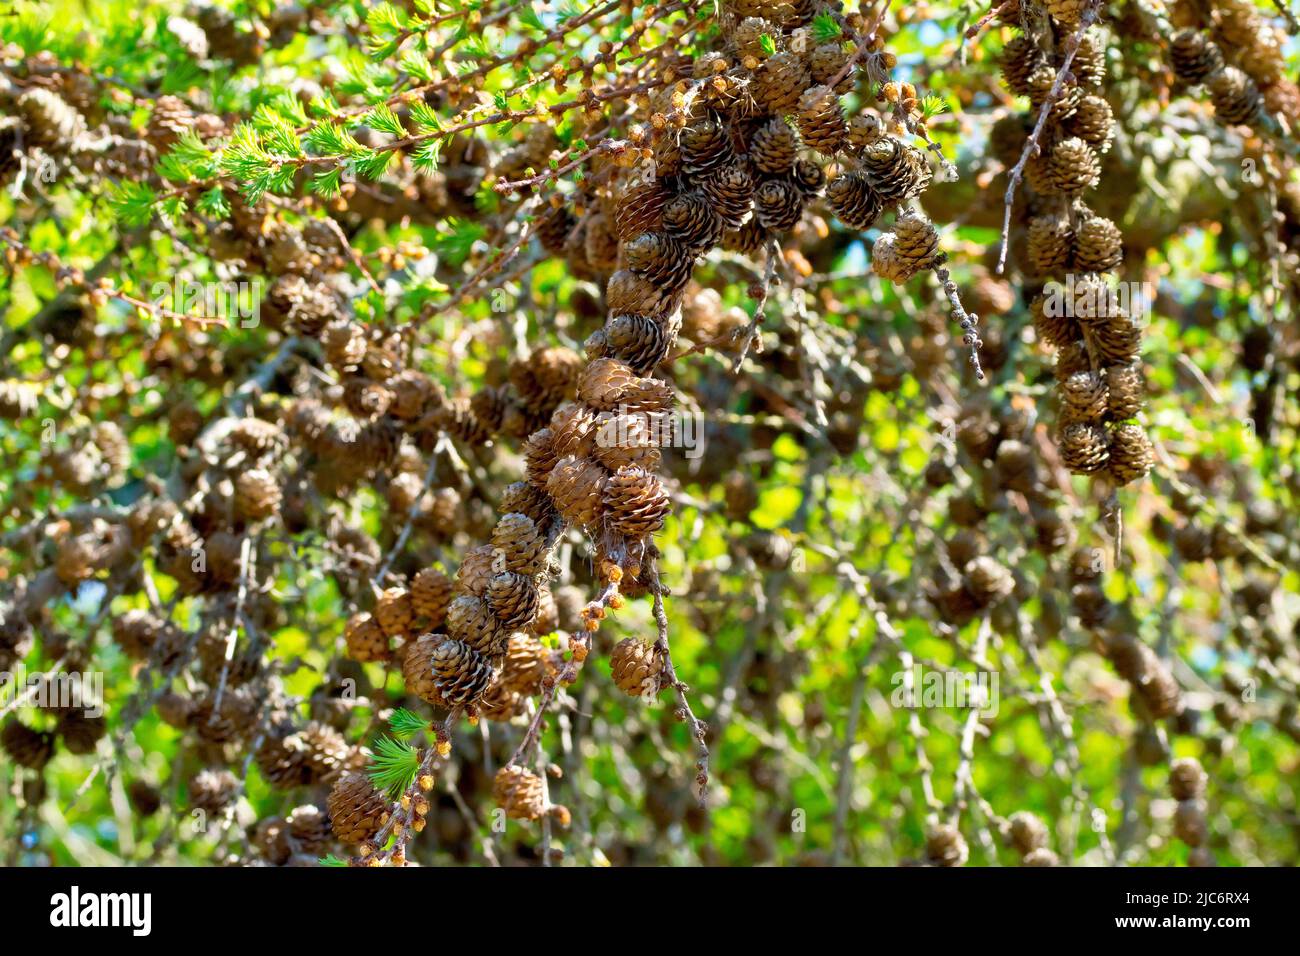 Larch, most likely Japanese Larch (larix kaempferi), close up of a multitude of mature cones hanging from a branch of the tree. Stock Photo